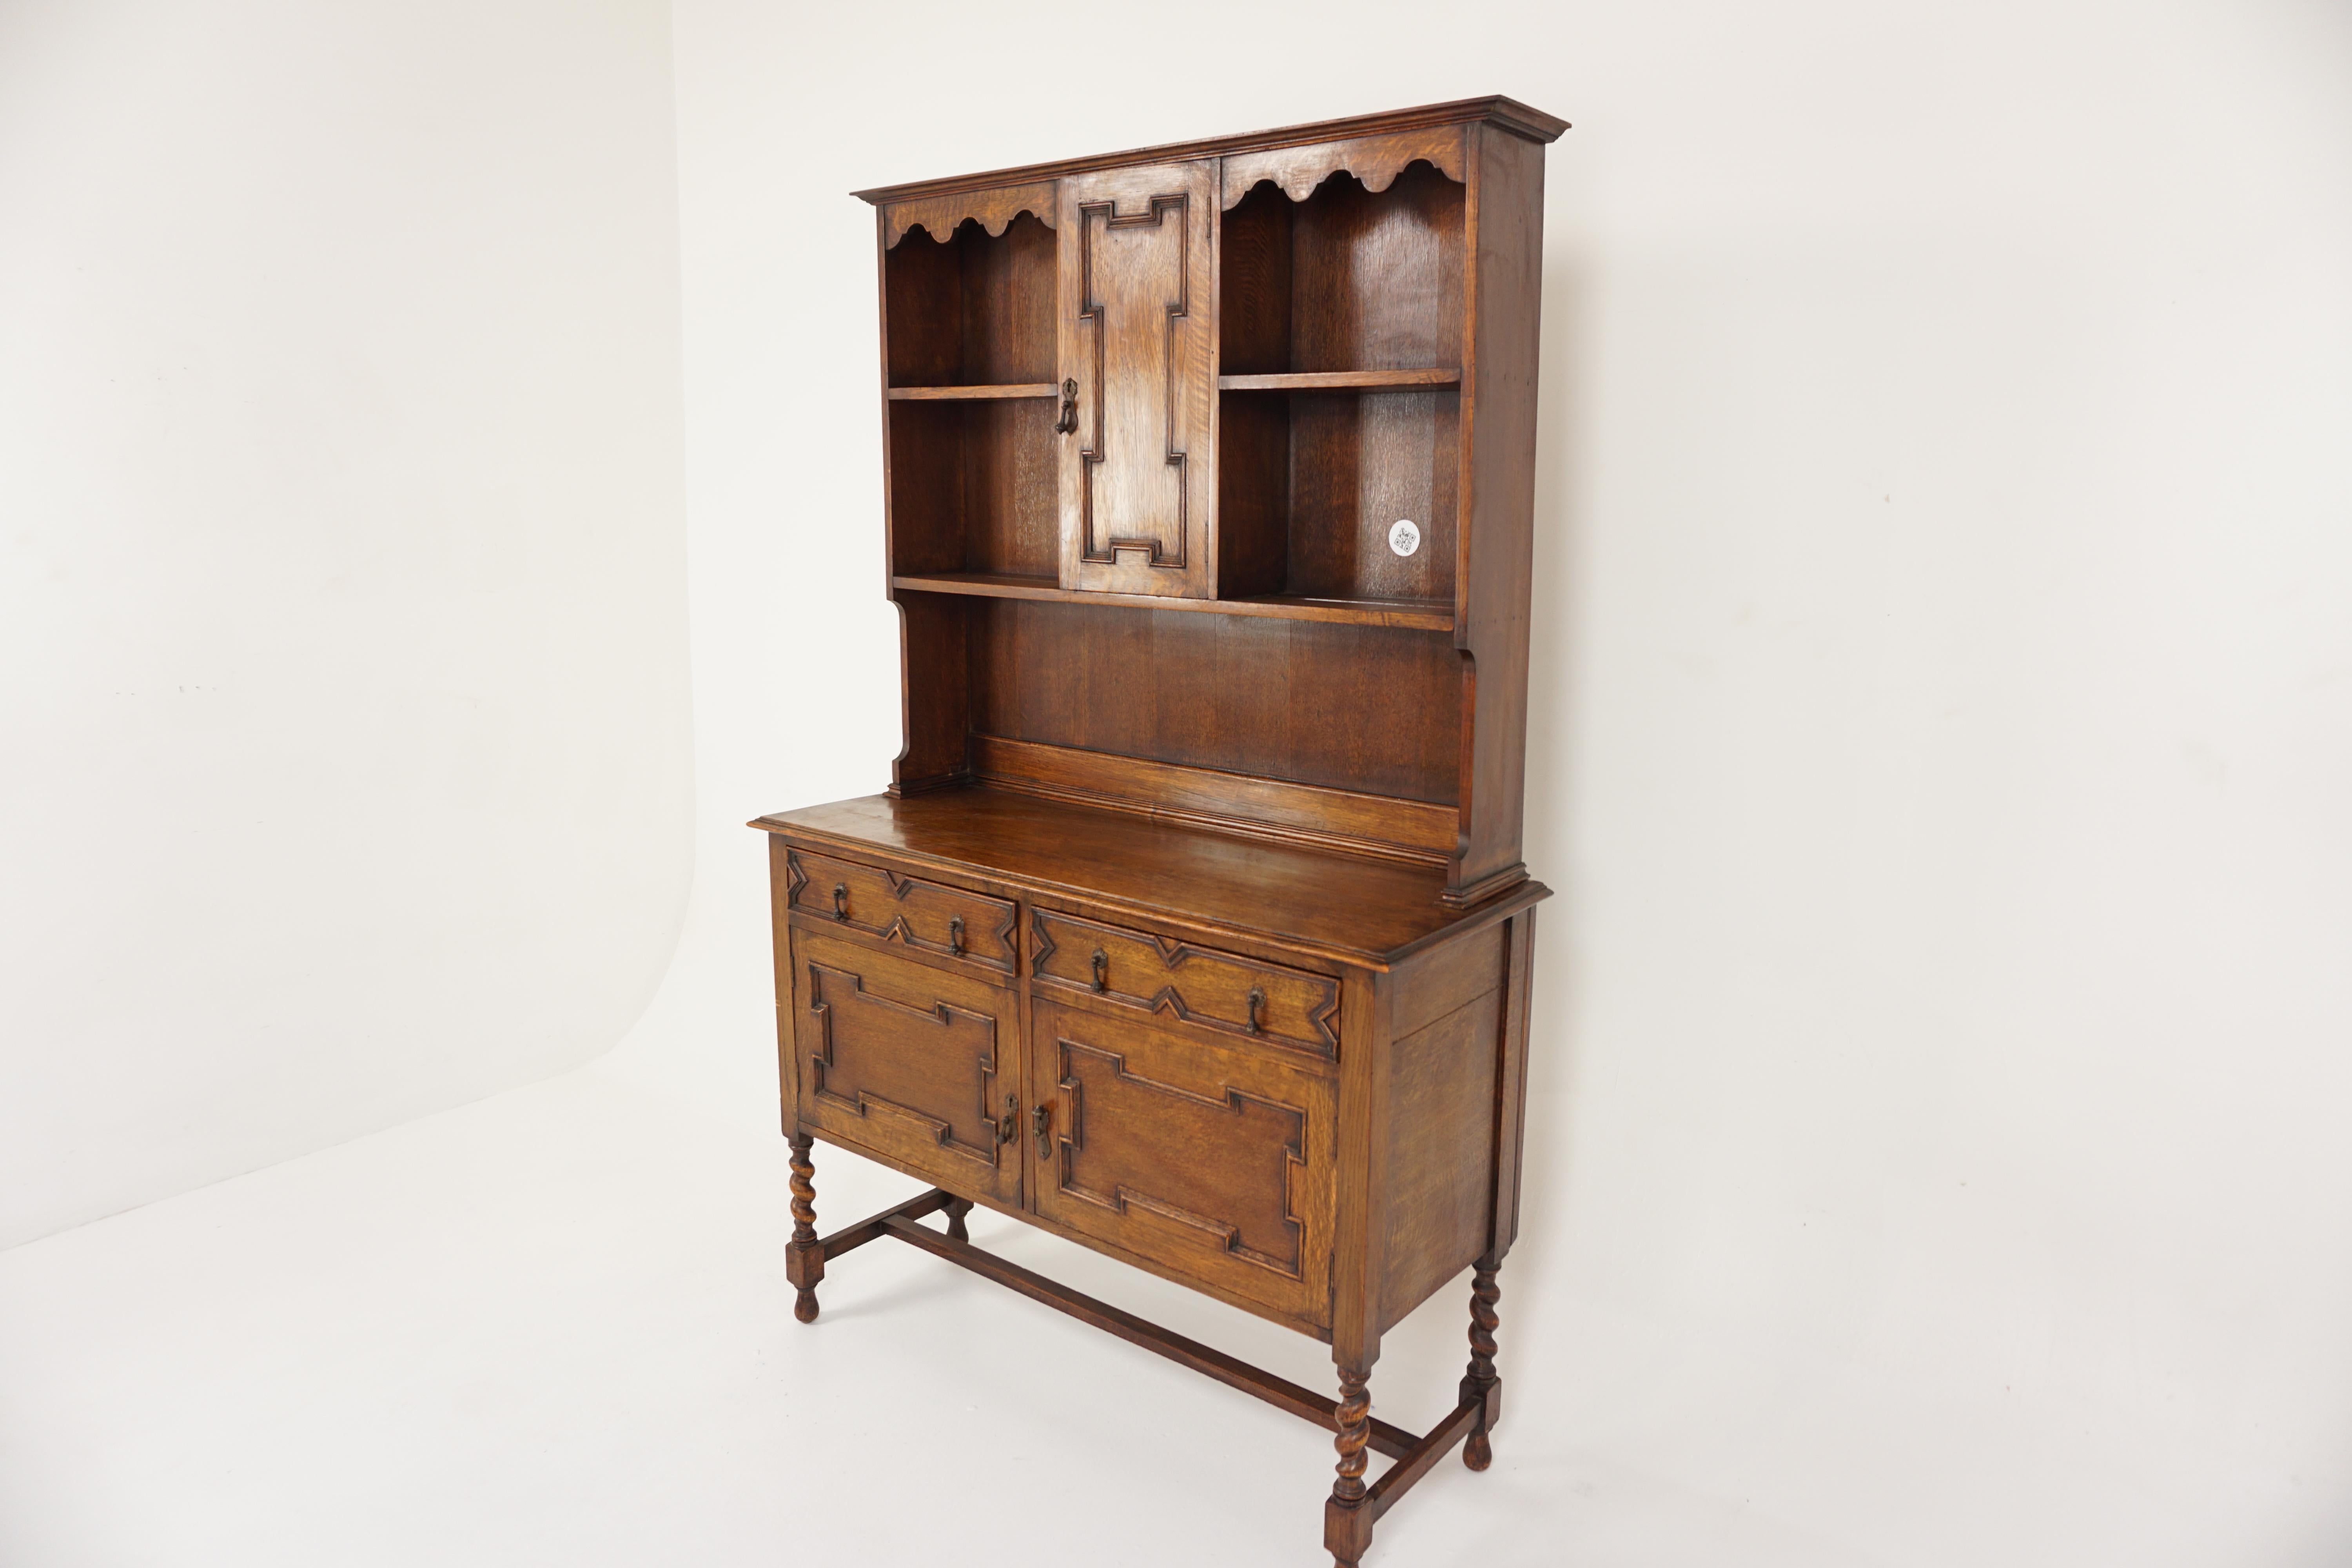 Ant. Tiger Oak barley twist welsh dresser, sideboard, buffet + hutch, Scotland 1920, H752.

Scotland 1920
Solid Oak
Original Finish
Moulded cornice on top
Single panelled door in the center
Opens to reveal single shelf
Flanked by a pair of